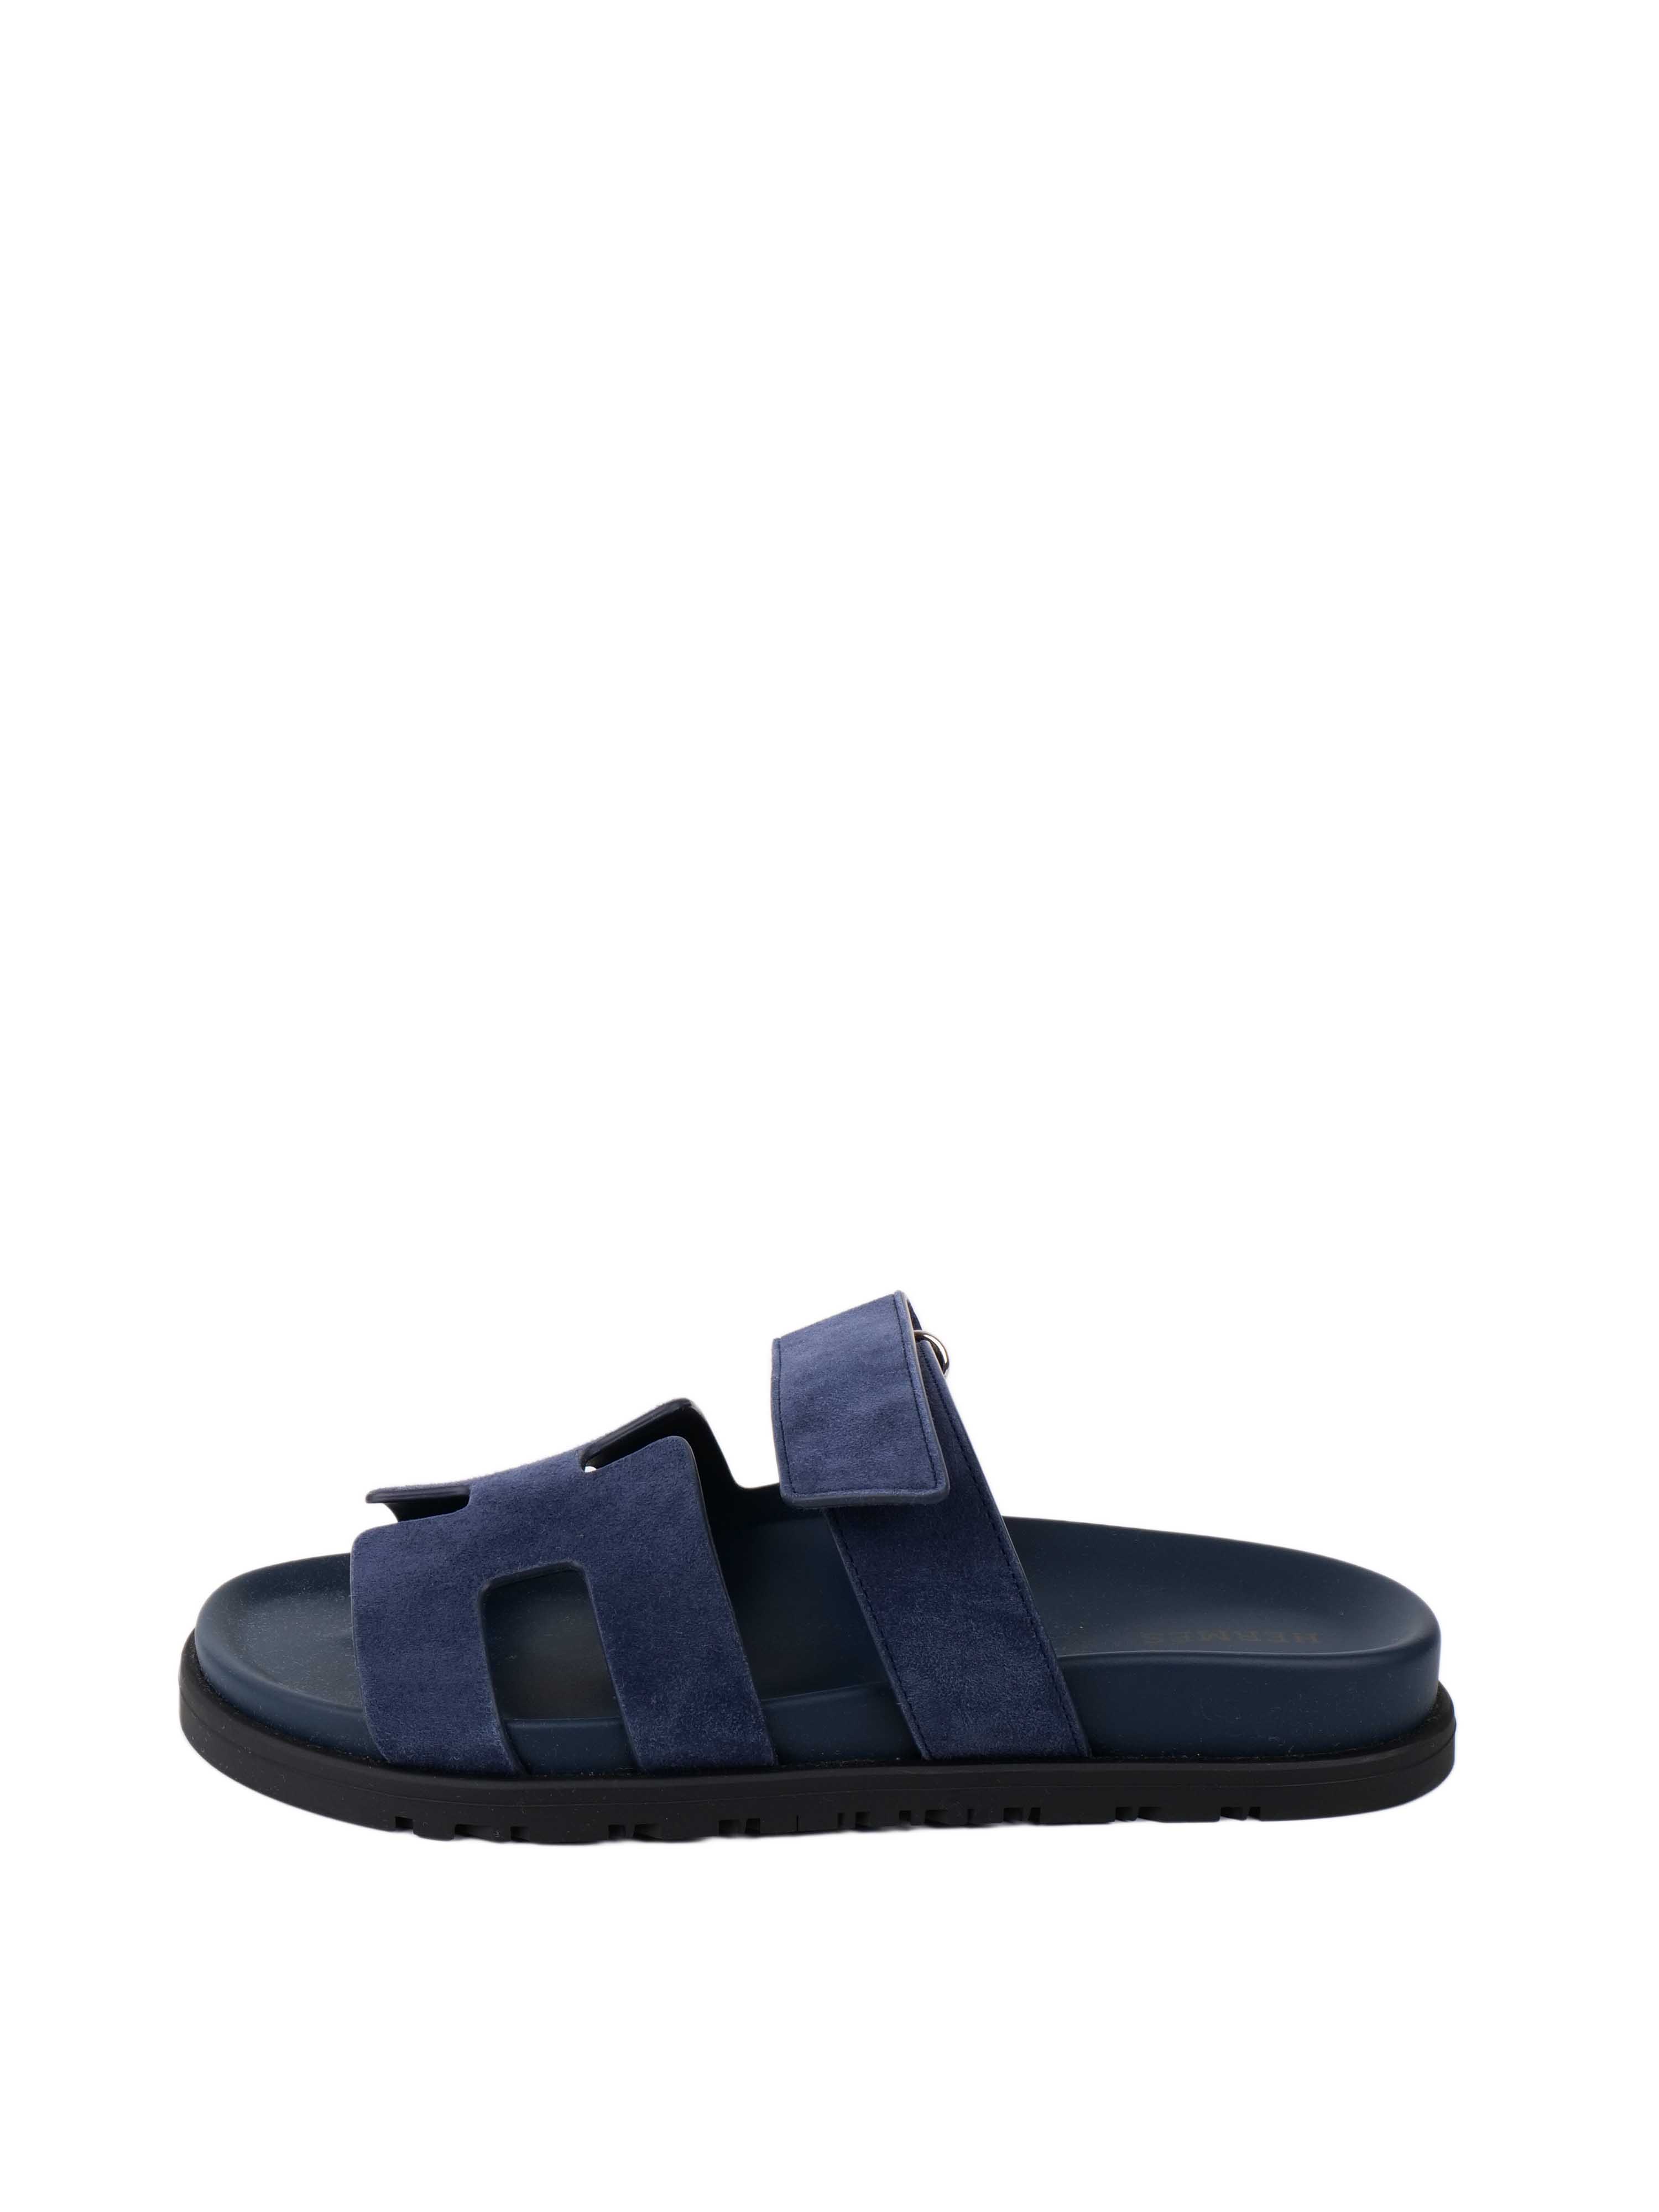 Hermes Chypre Navy Suede Sandals 37.5.